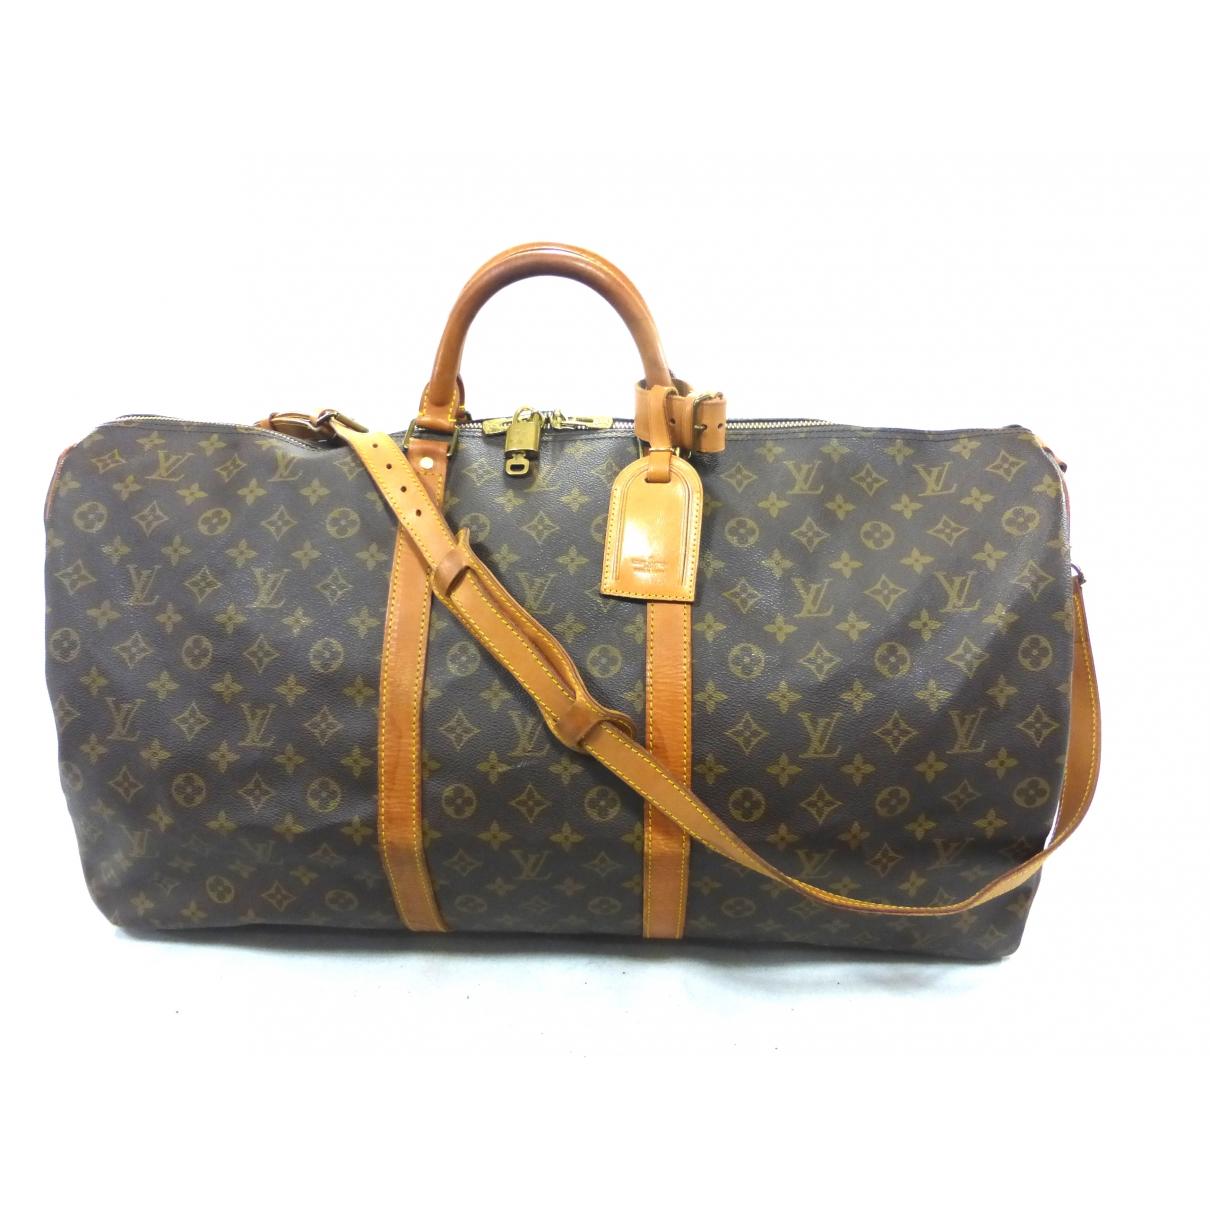 Lyst - Louis Vuitton Pre-owned Keepall Brown Leather Travel Bags in Brown